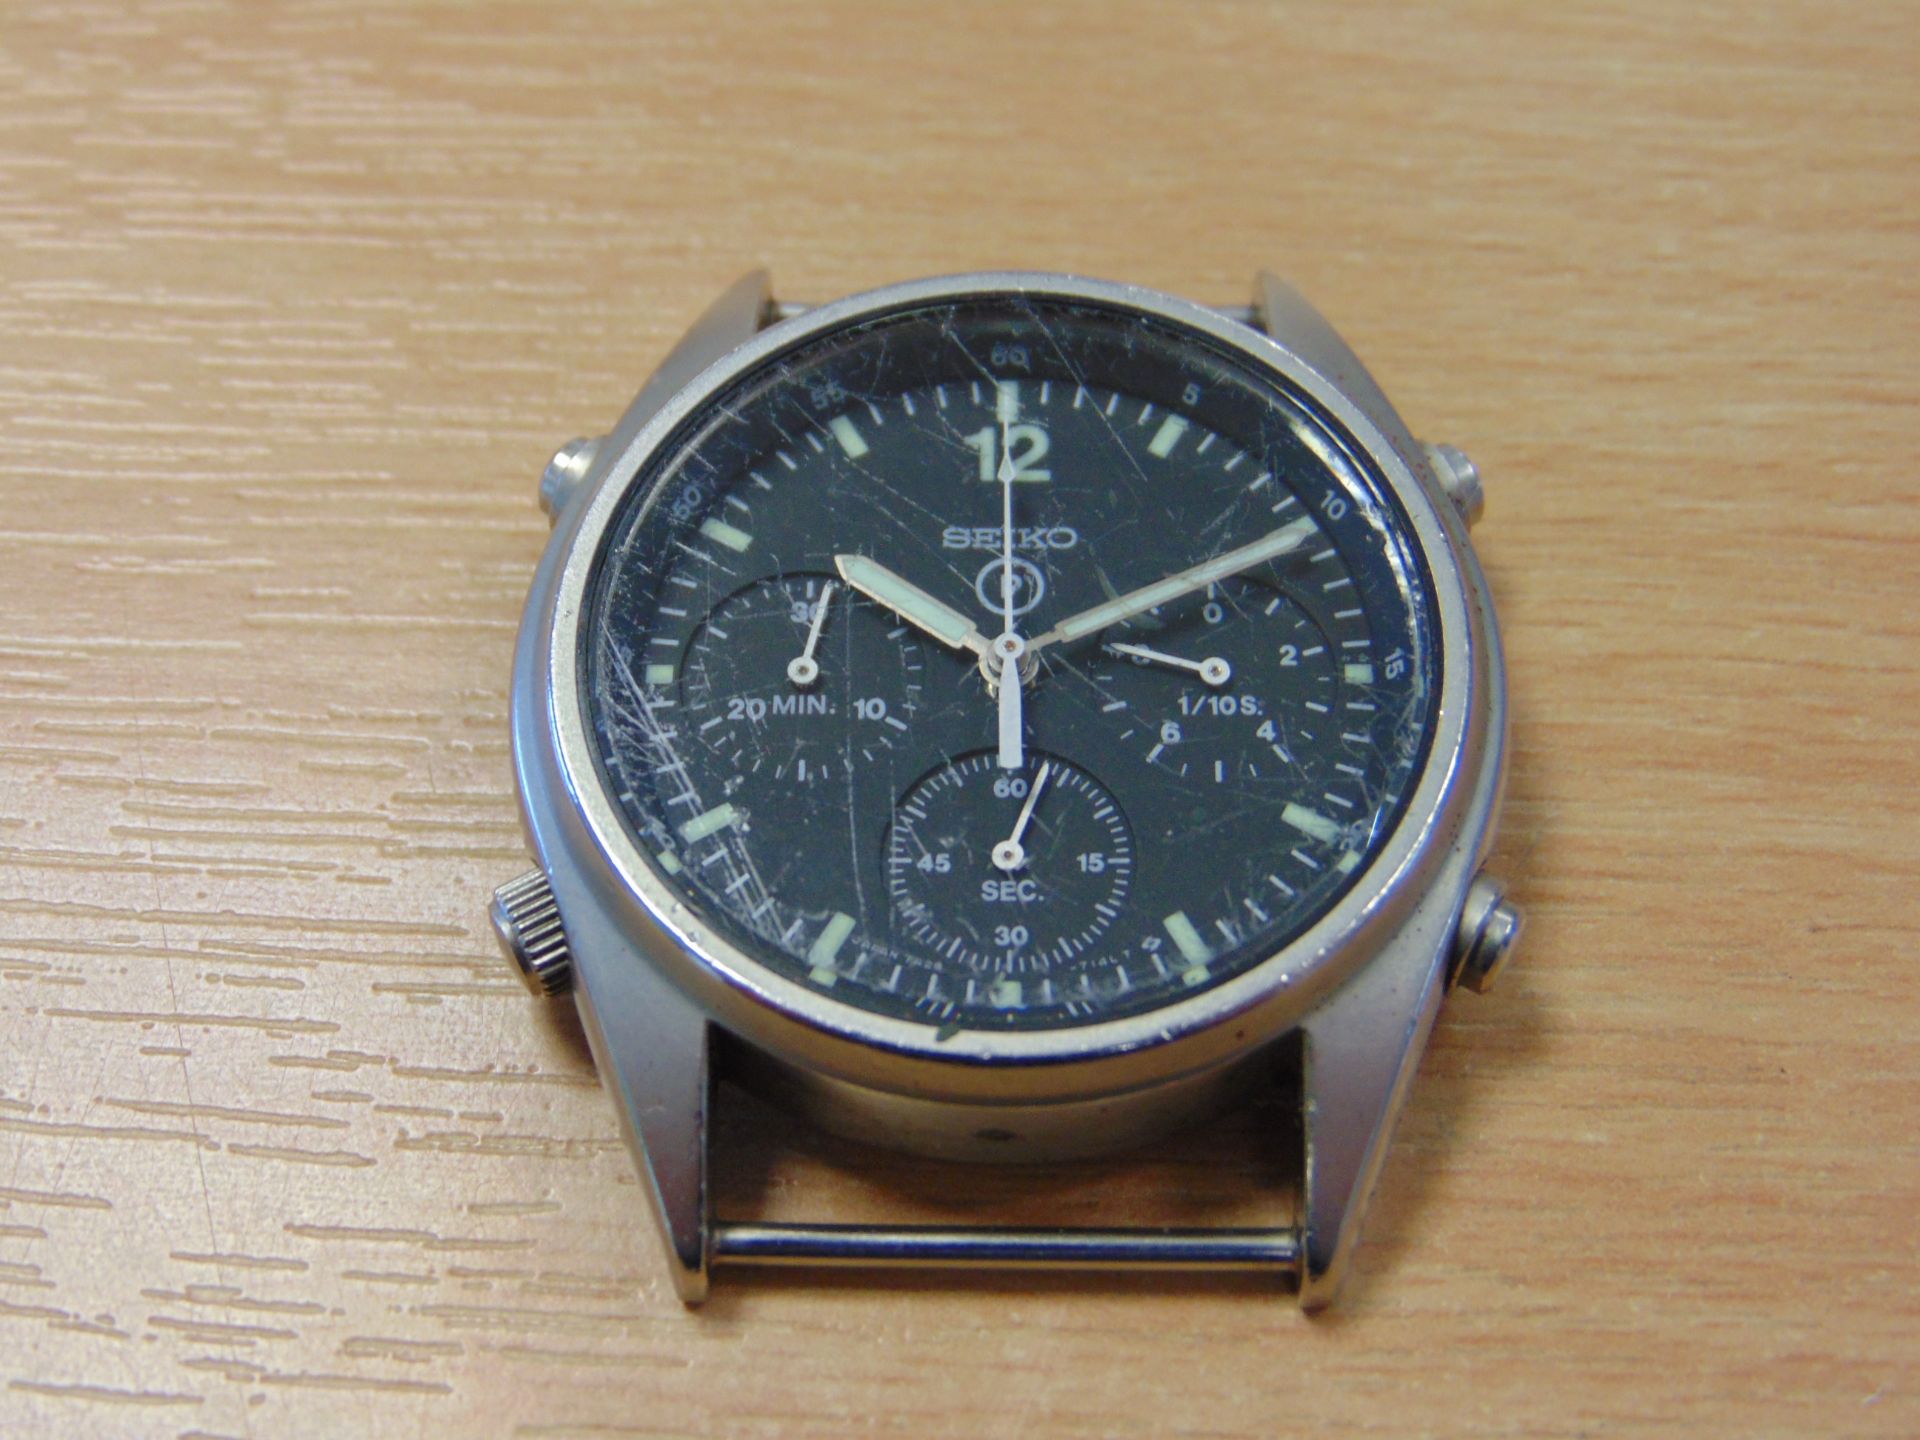 Rare Seiko Gen 1 Pilots Chrono RAF Harrier Force Issue - Image 3 of 6